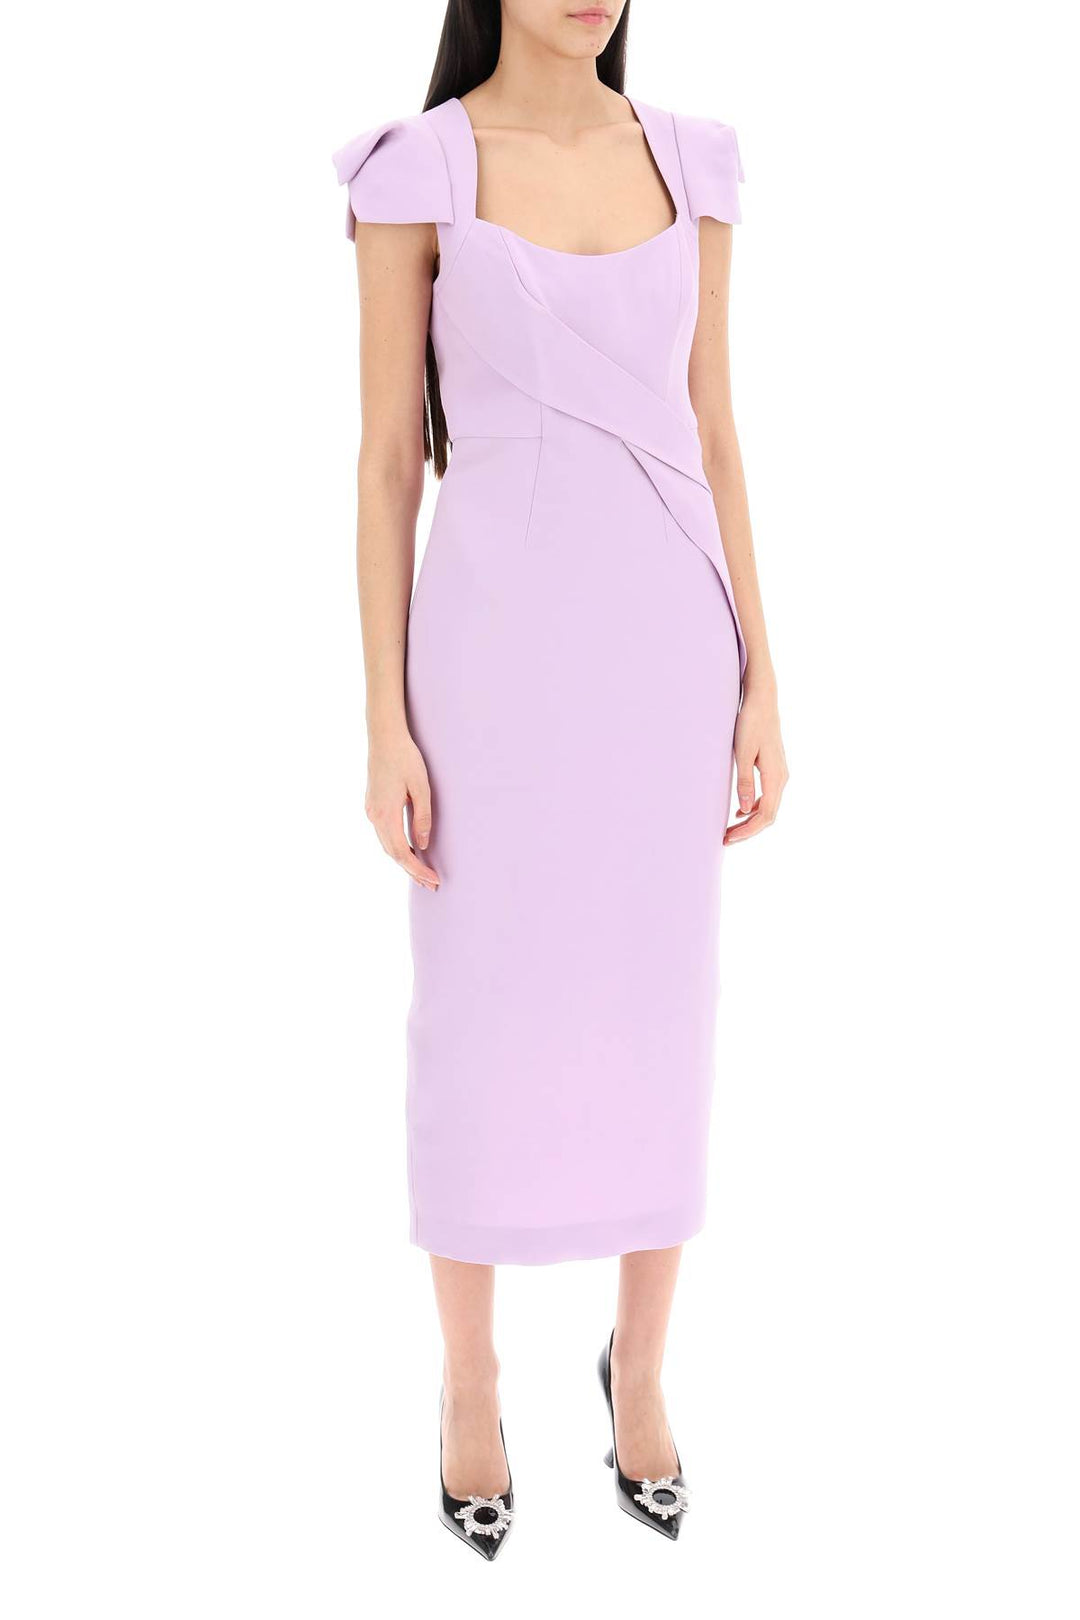 Roland Mouret Midi Dress With Draped Detailing   Pink